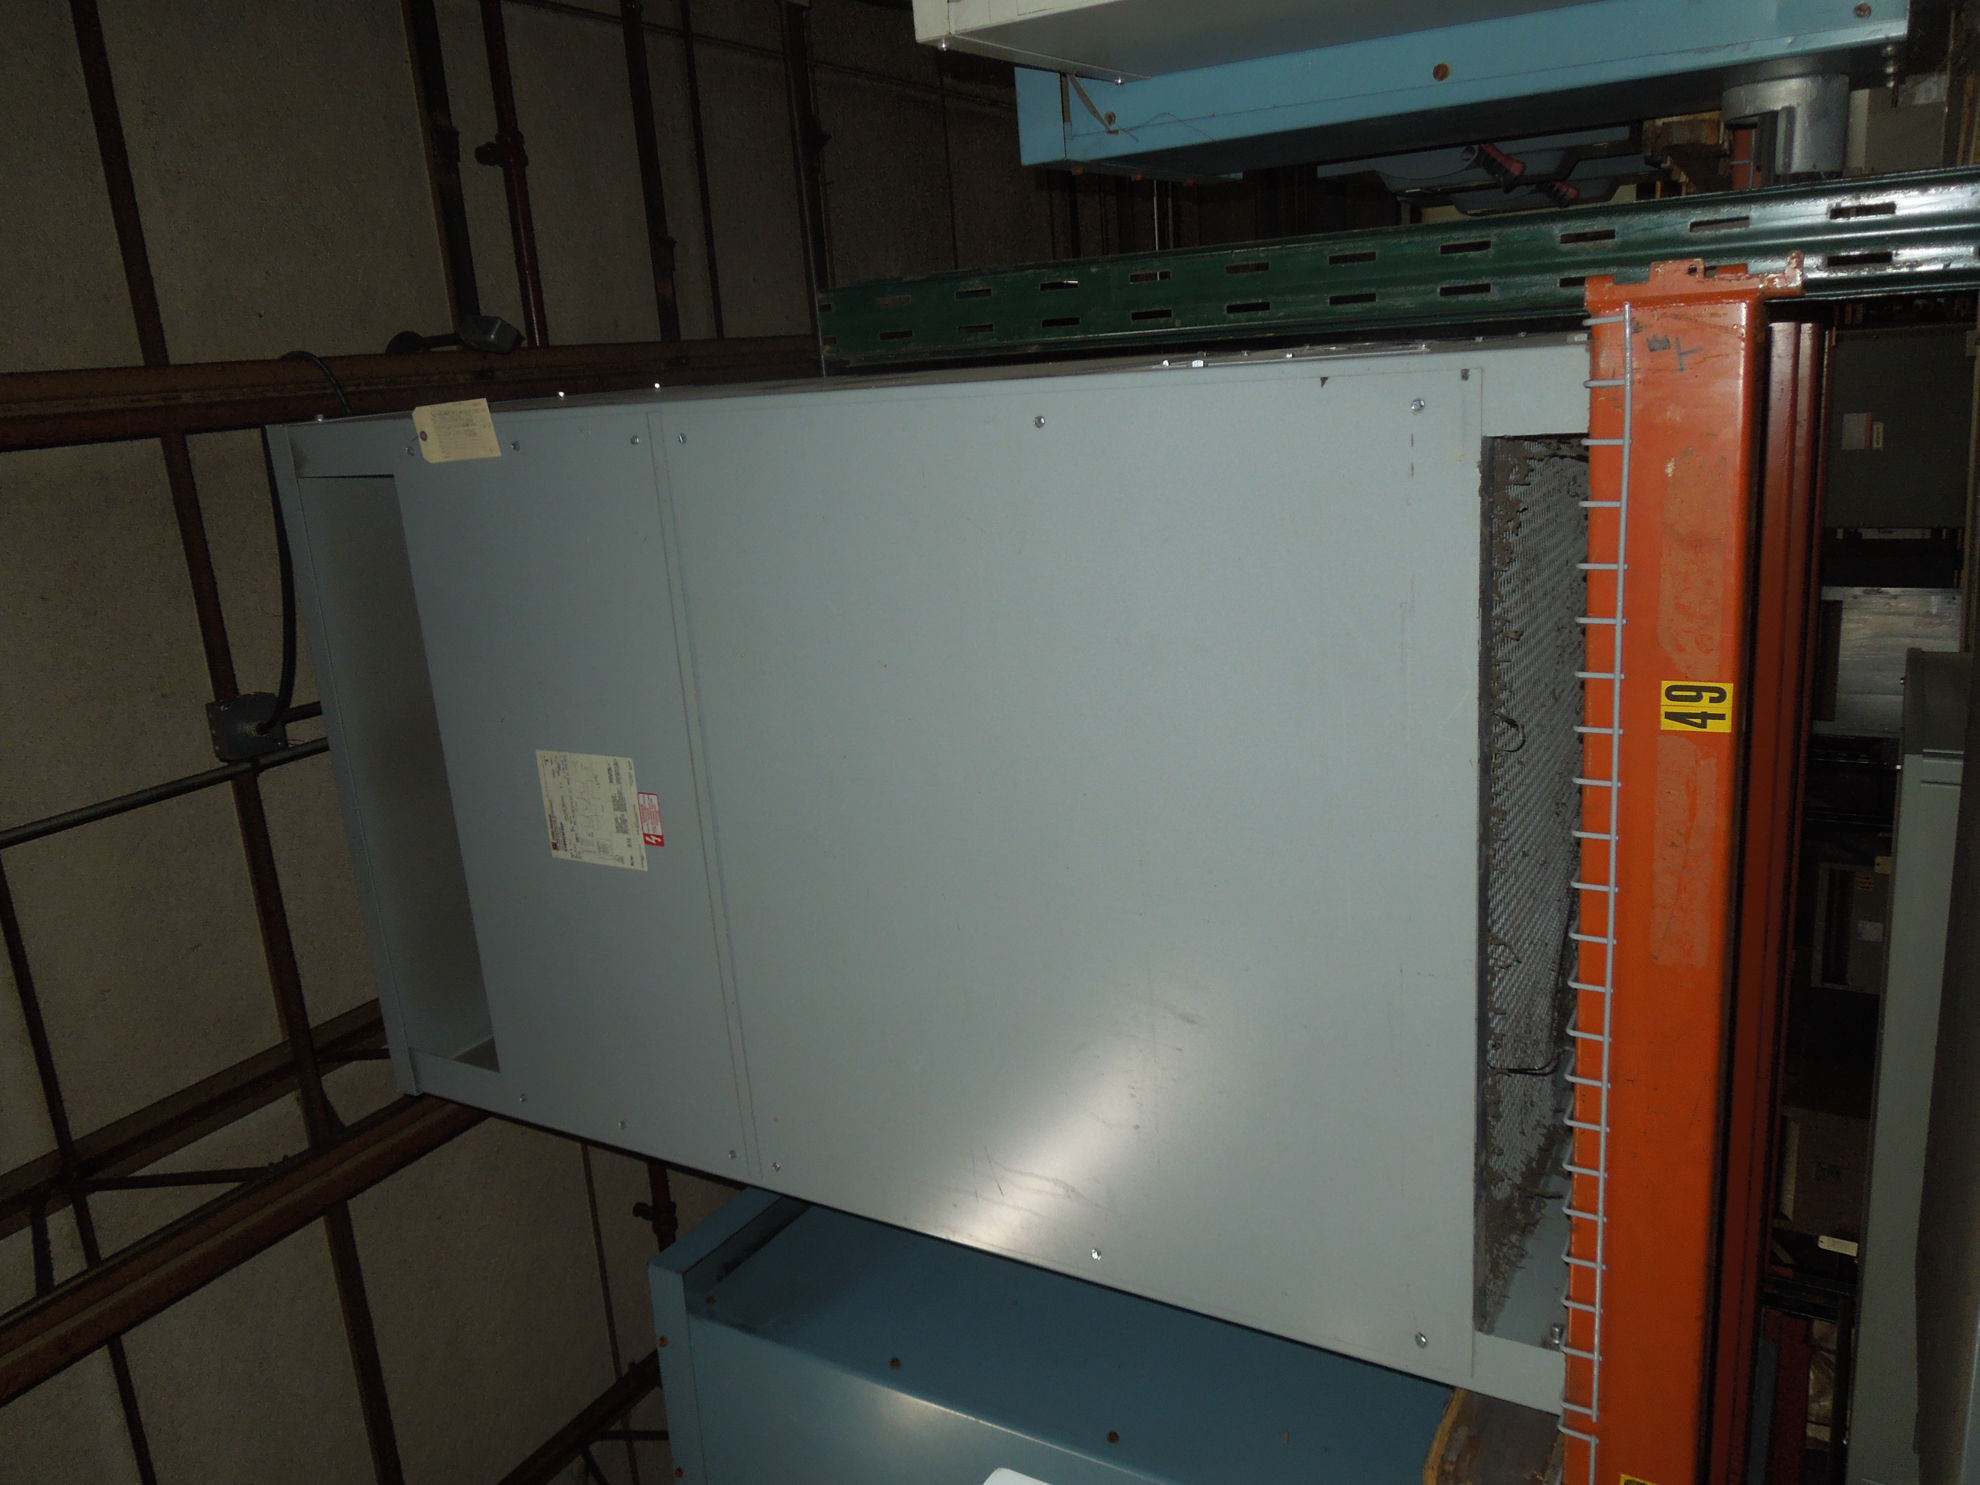 Picture of Cutler-Hammer 500 KVA 480-208Y/120 Volt 3 Phase Low Voltage Dry Type Transformer R&G